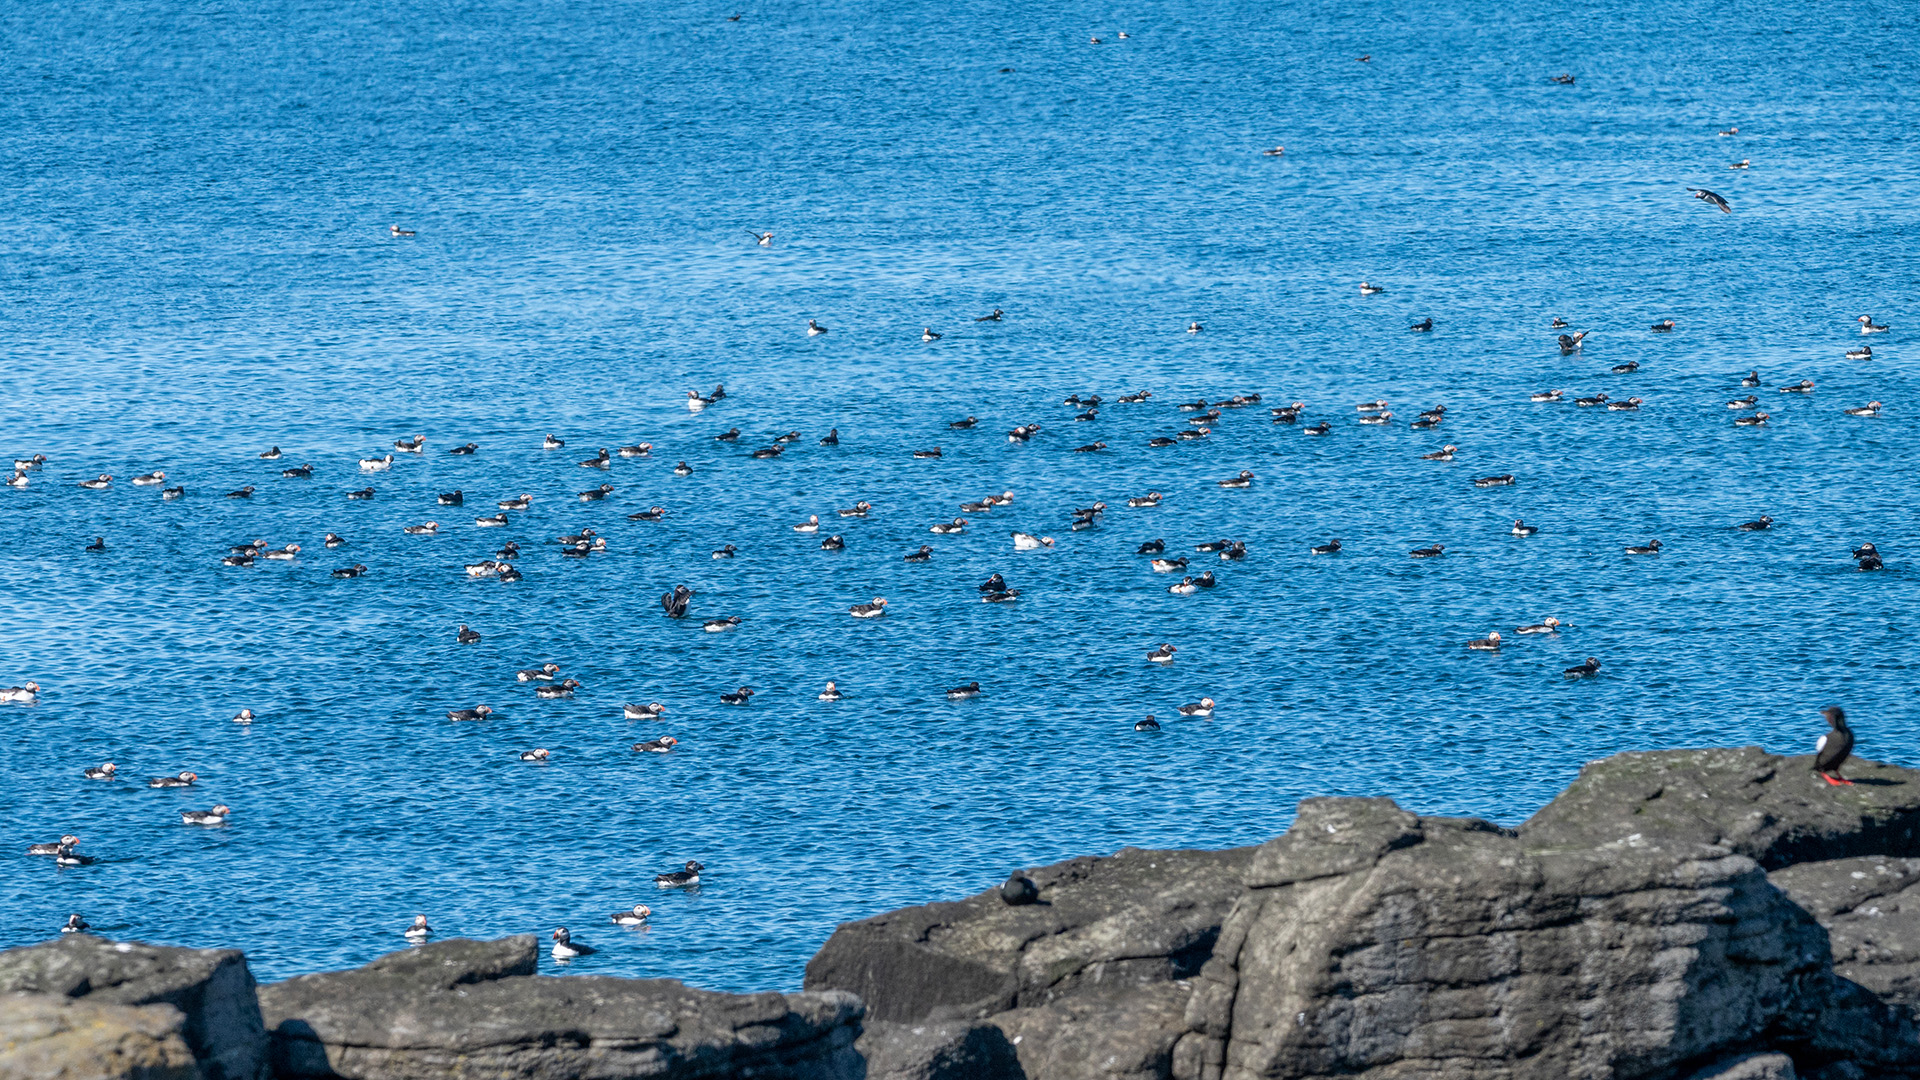 The sea surrounding Vigur Island is often dotted with resting puffins as far as the eye can see.